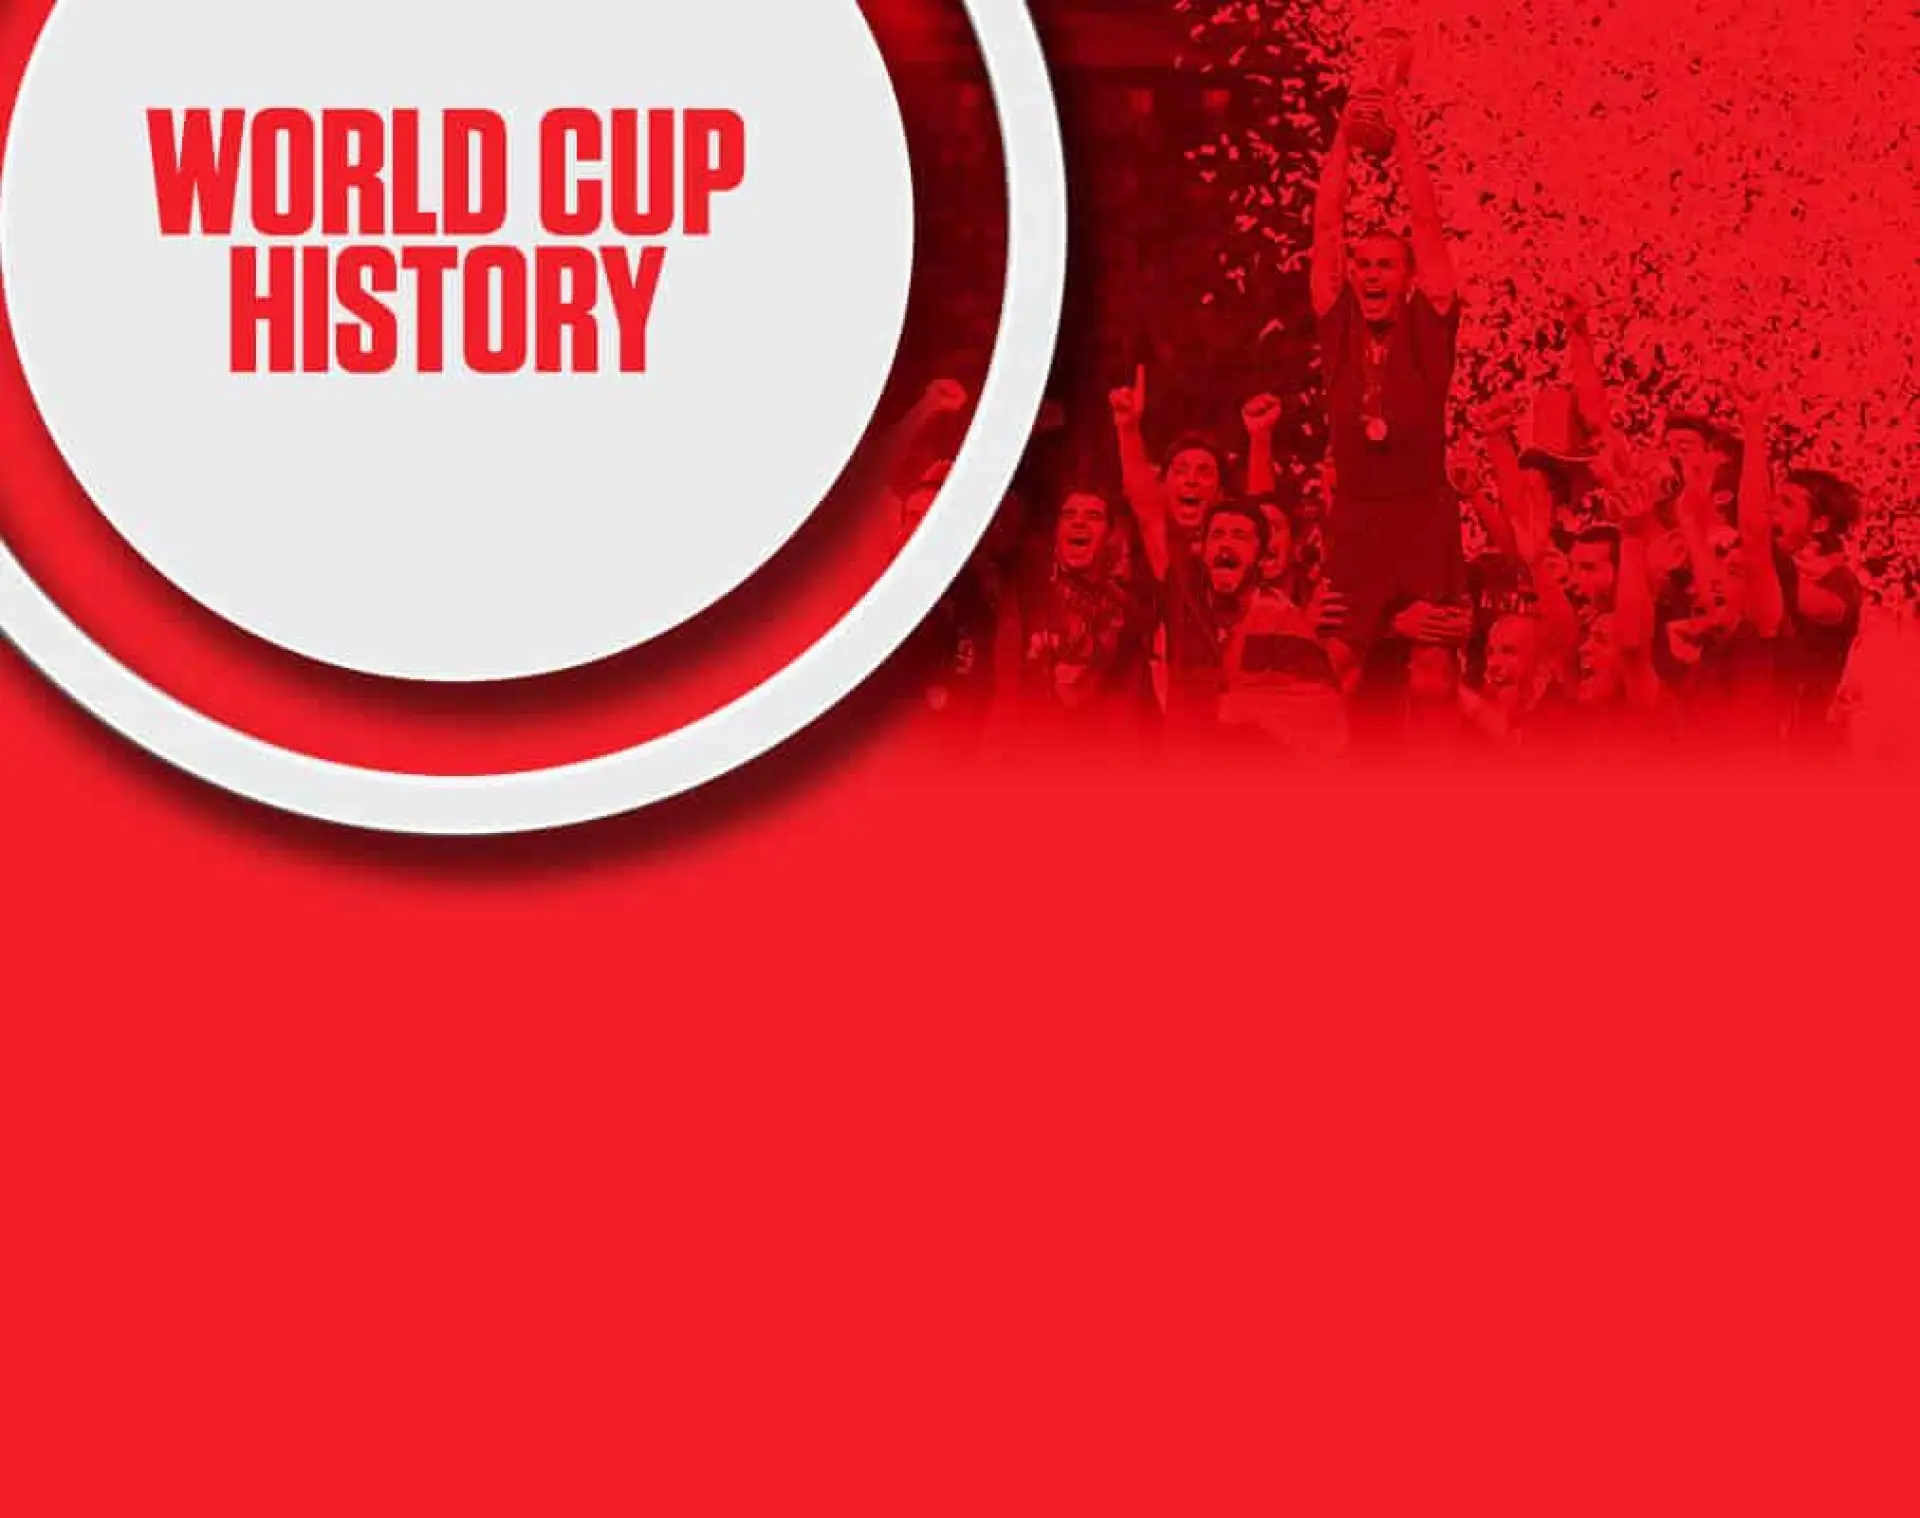 World cup history